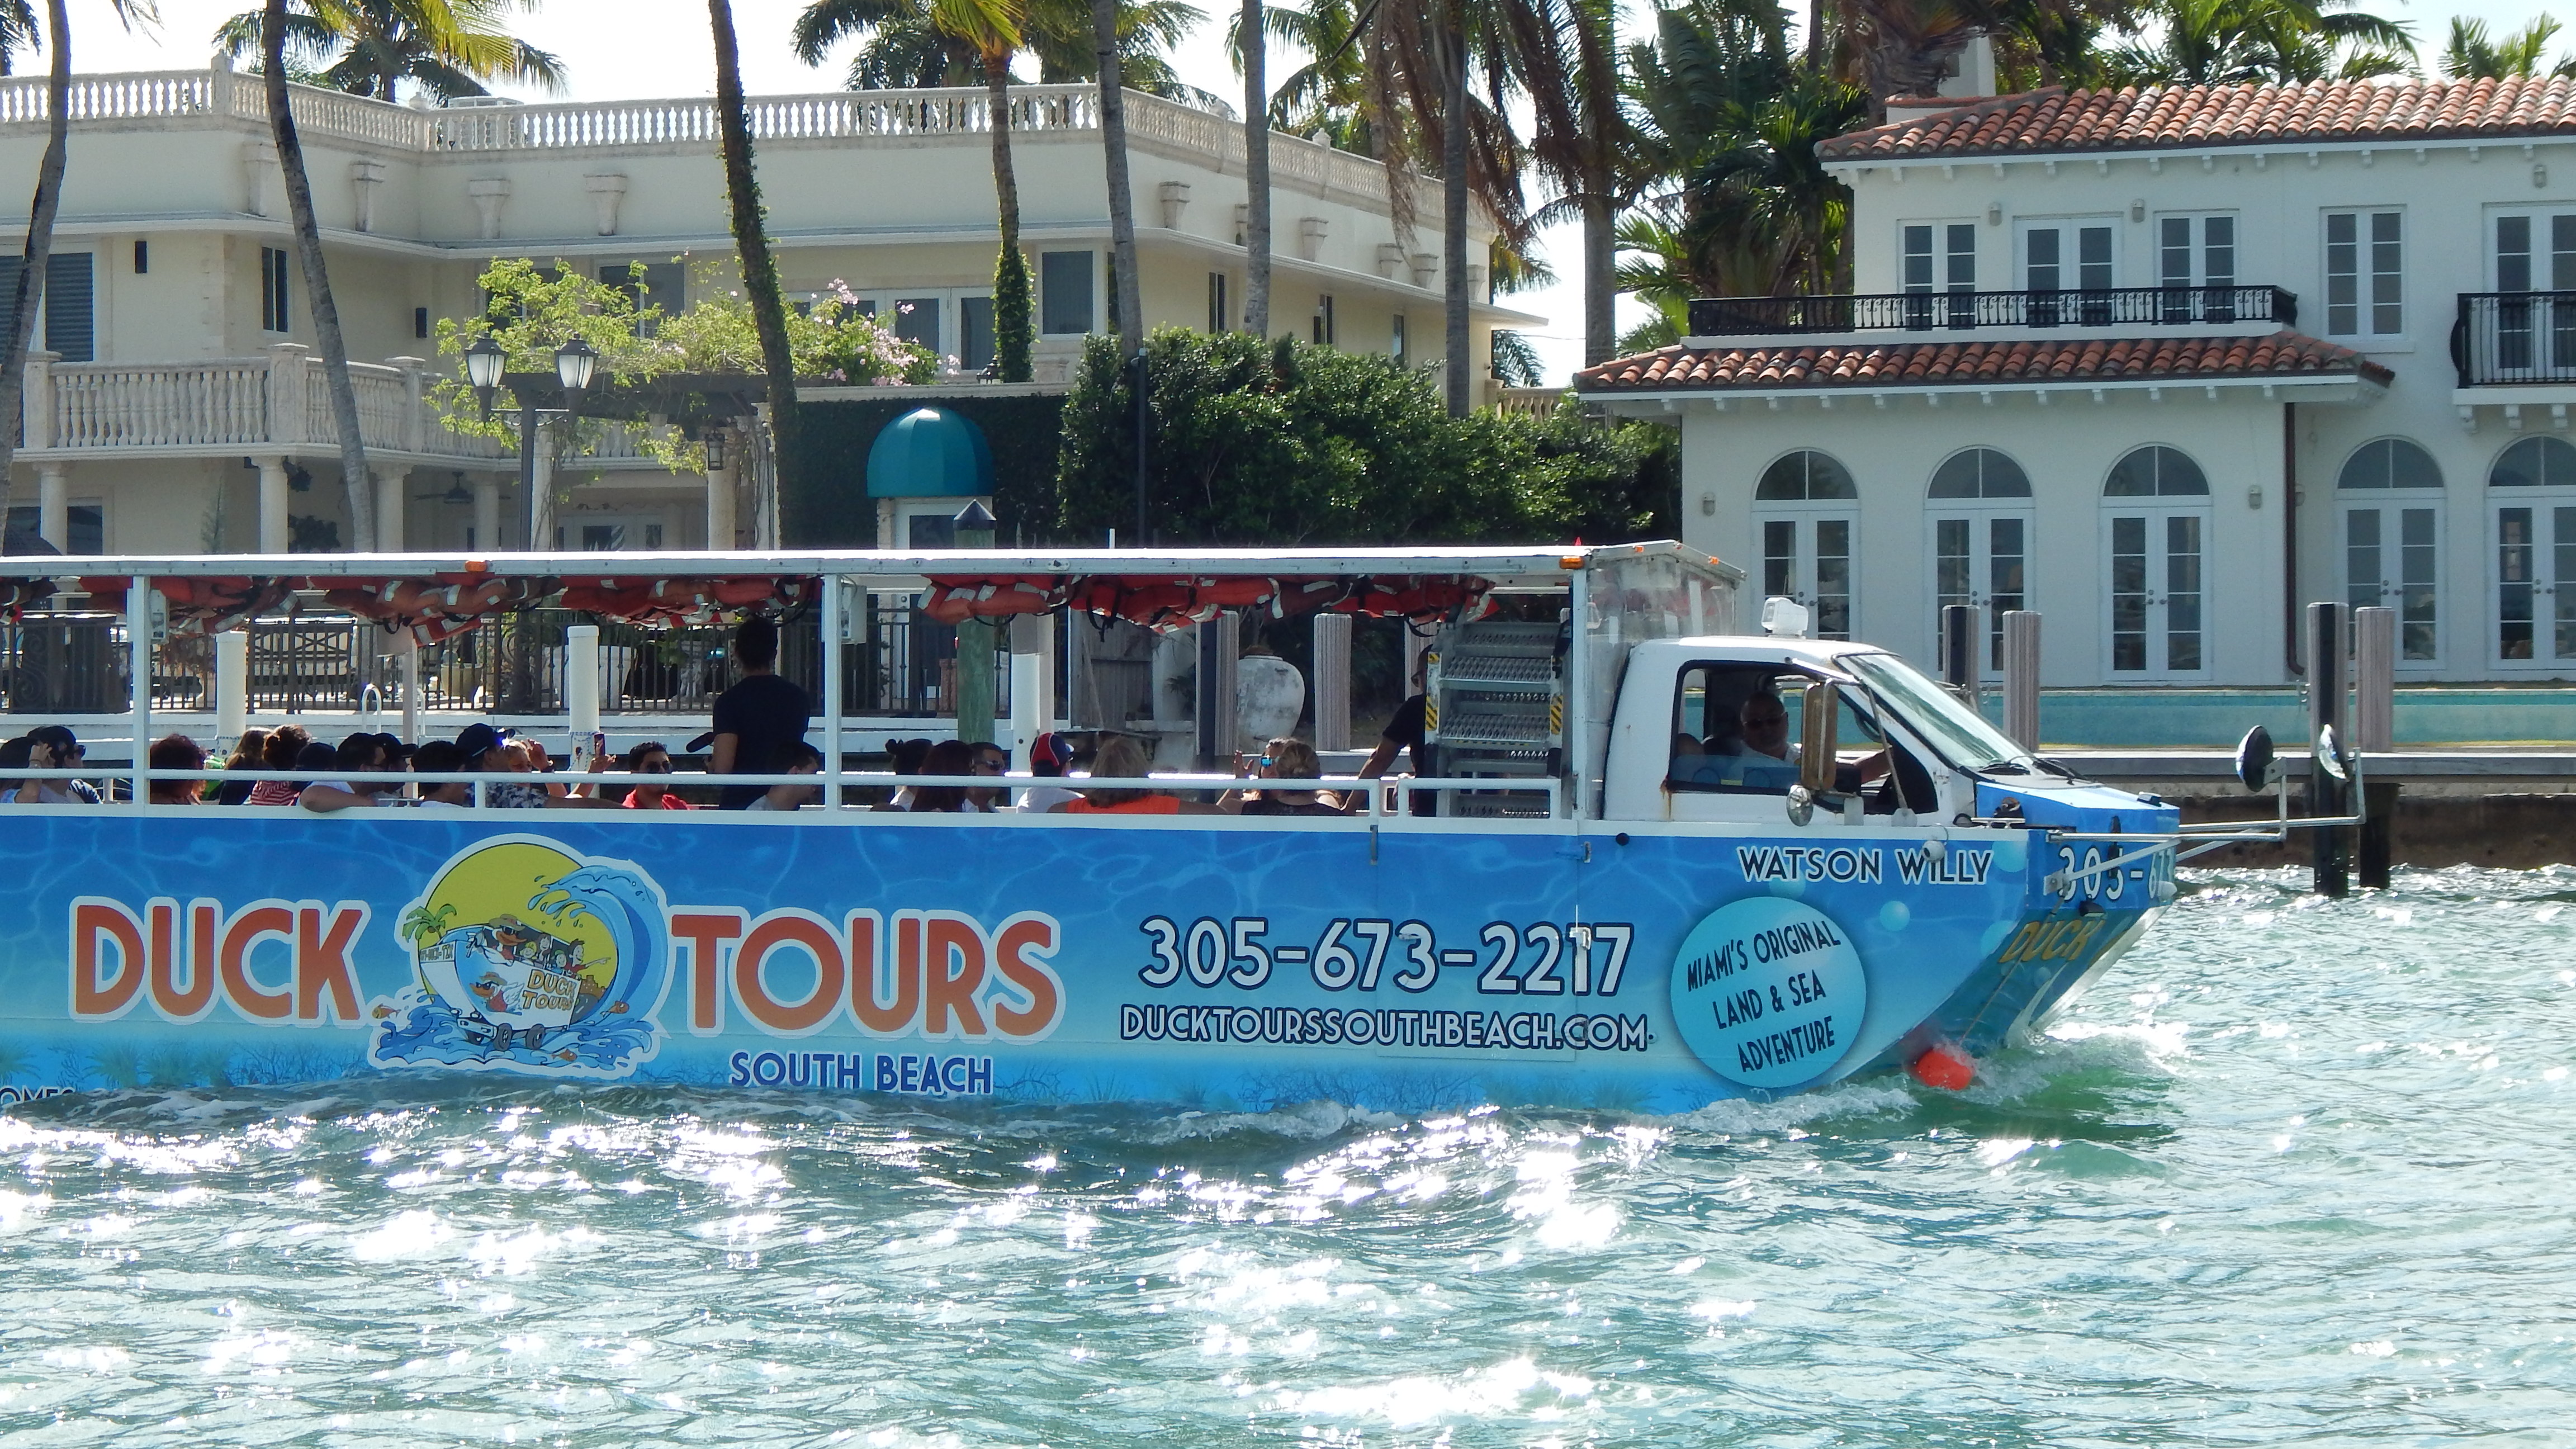 Reviews for Duck Tours South Beach